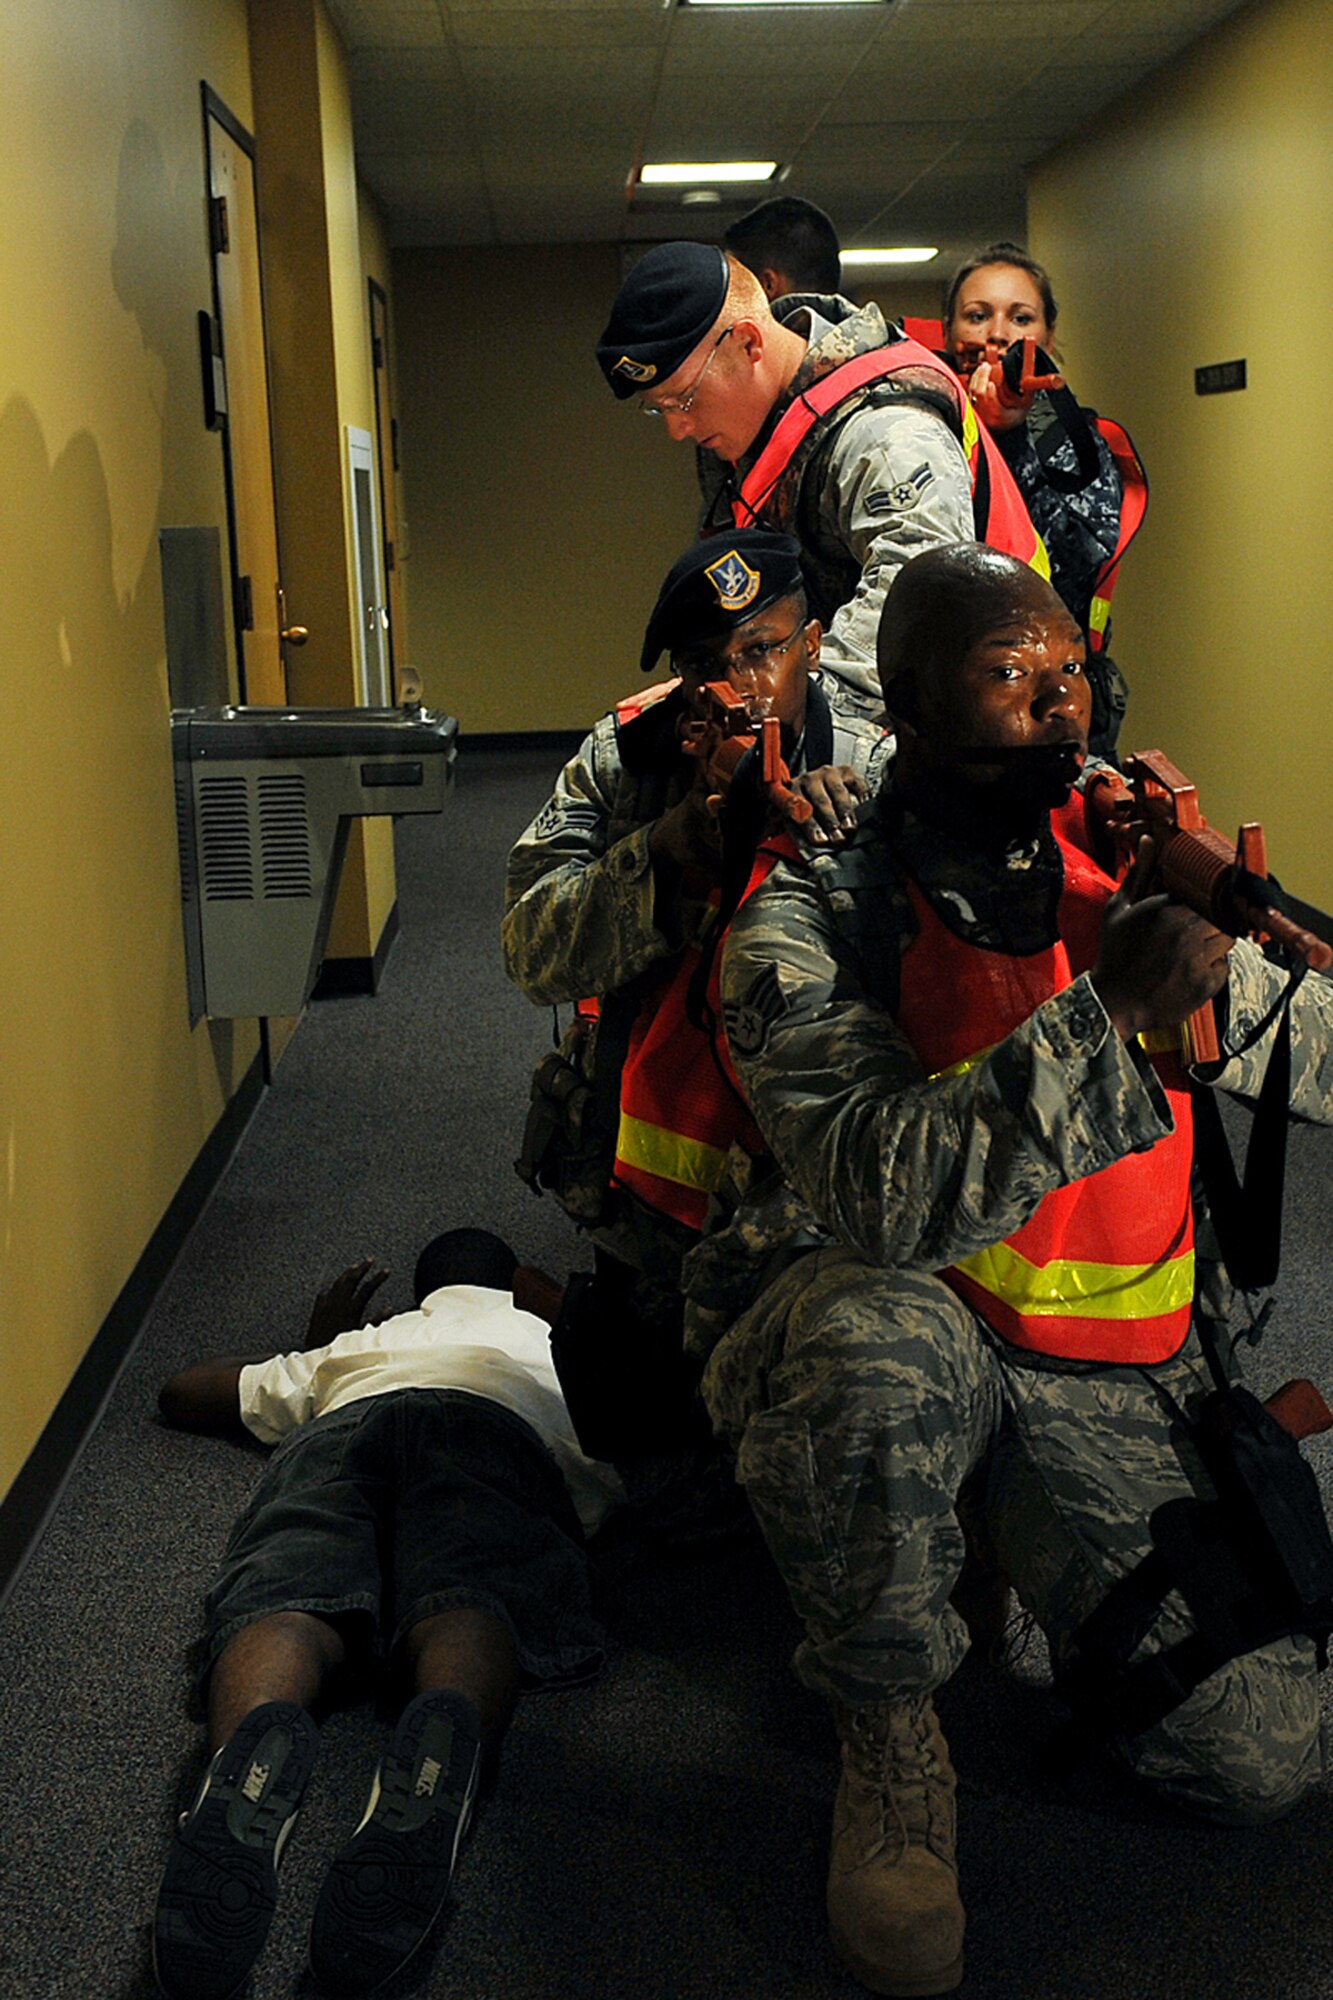 OFFUTT AIR FORCE BASE, Neb. - Team members from the 55th Security Forces Squadron scan the hallways during an active shooter exercise Sept. 10 in the base's main customer support building.  Team Offutt's first responders conduct various exercise scenarios throughout the year to prepare for possible threats to people and resources. U.S. Air Force photo by Charles Haymond